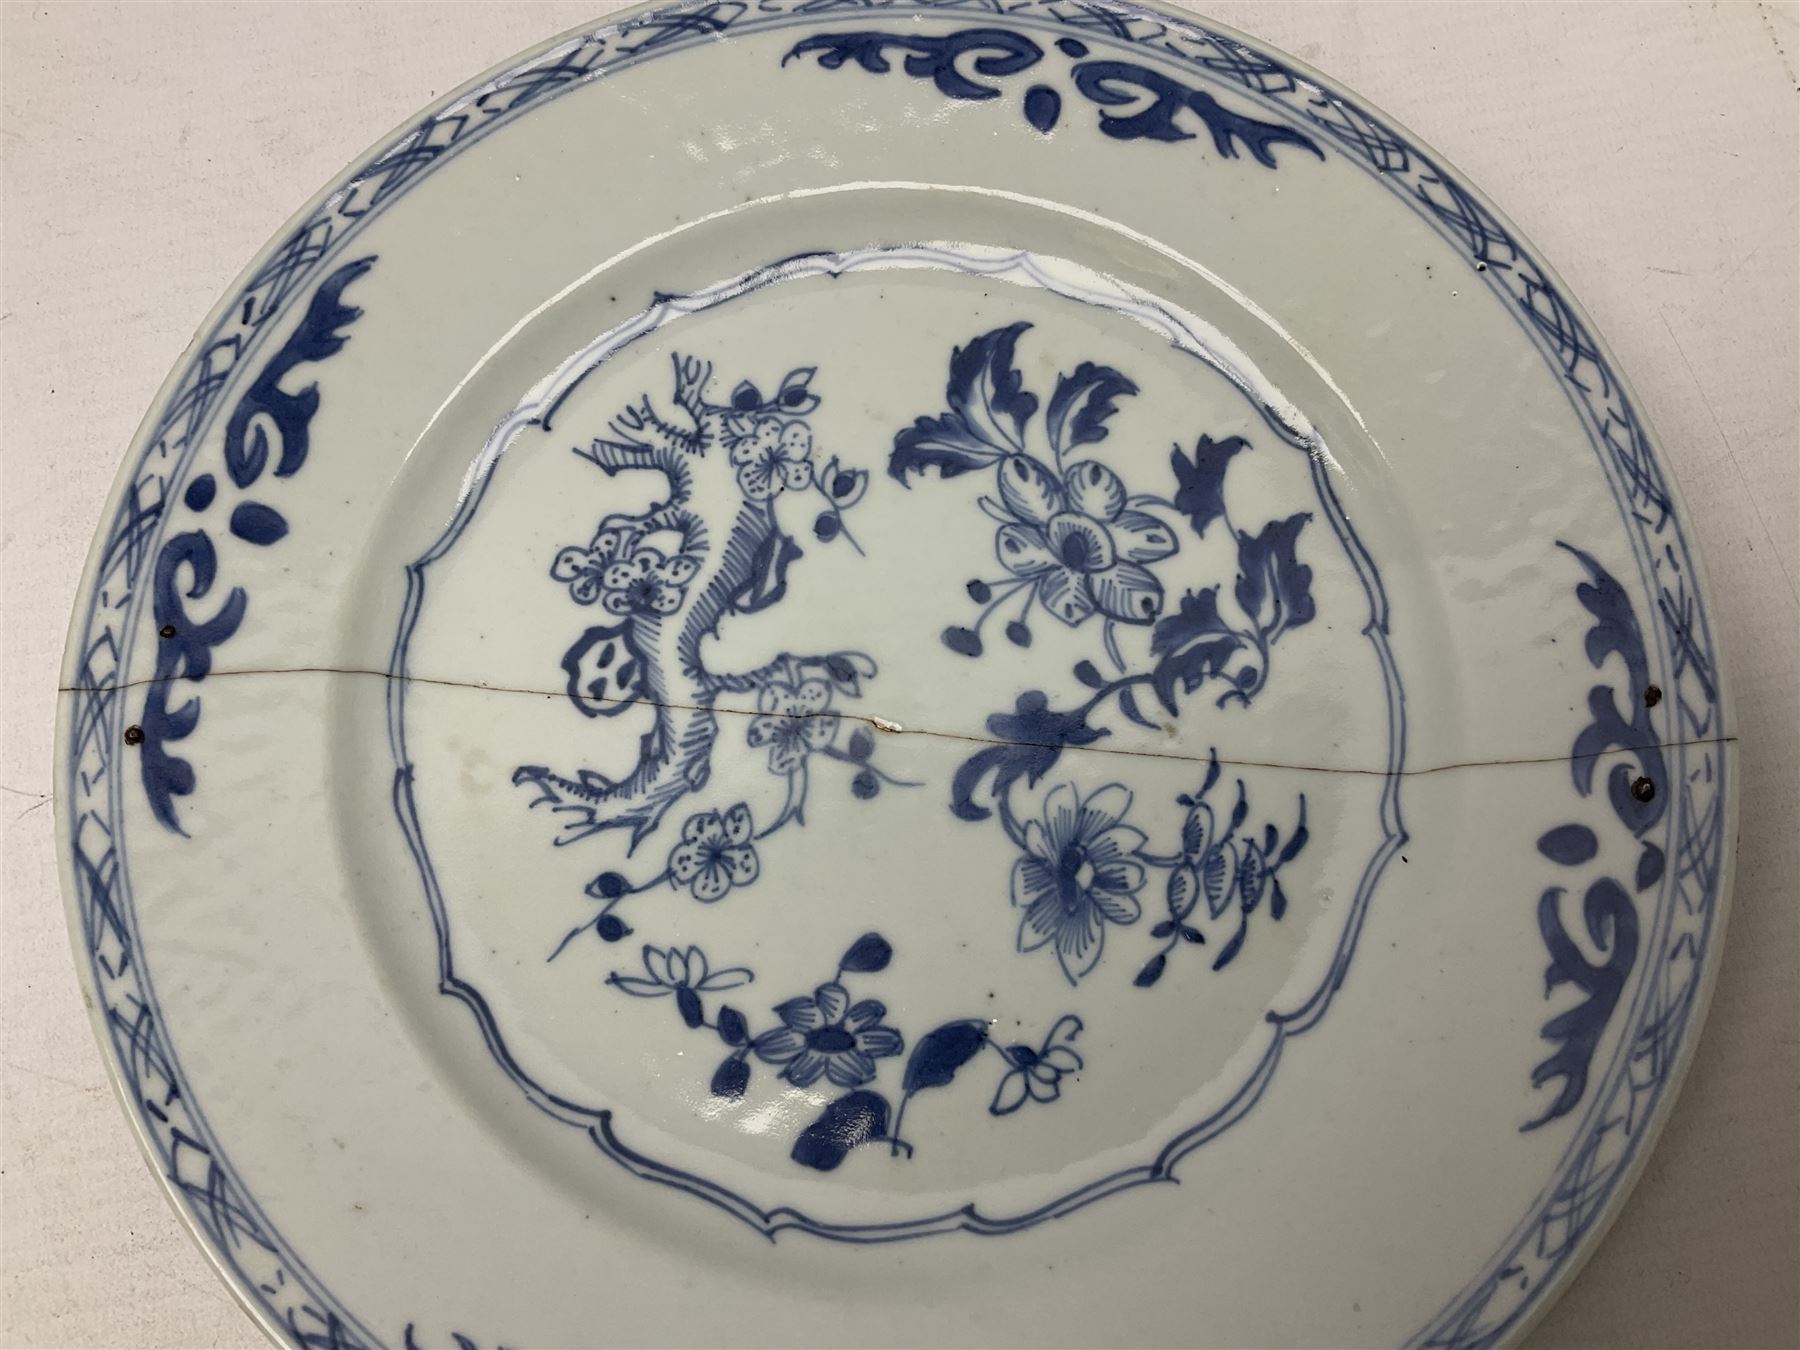 Set of four 18th century Chinese export blue and white porcelain plates with painted foliate decorat - Image 9 of 14